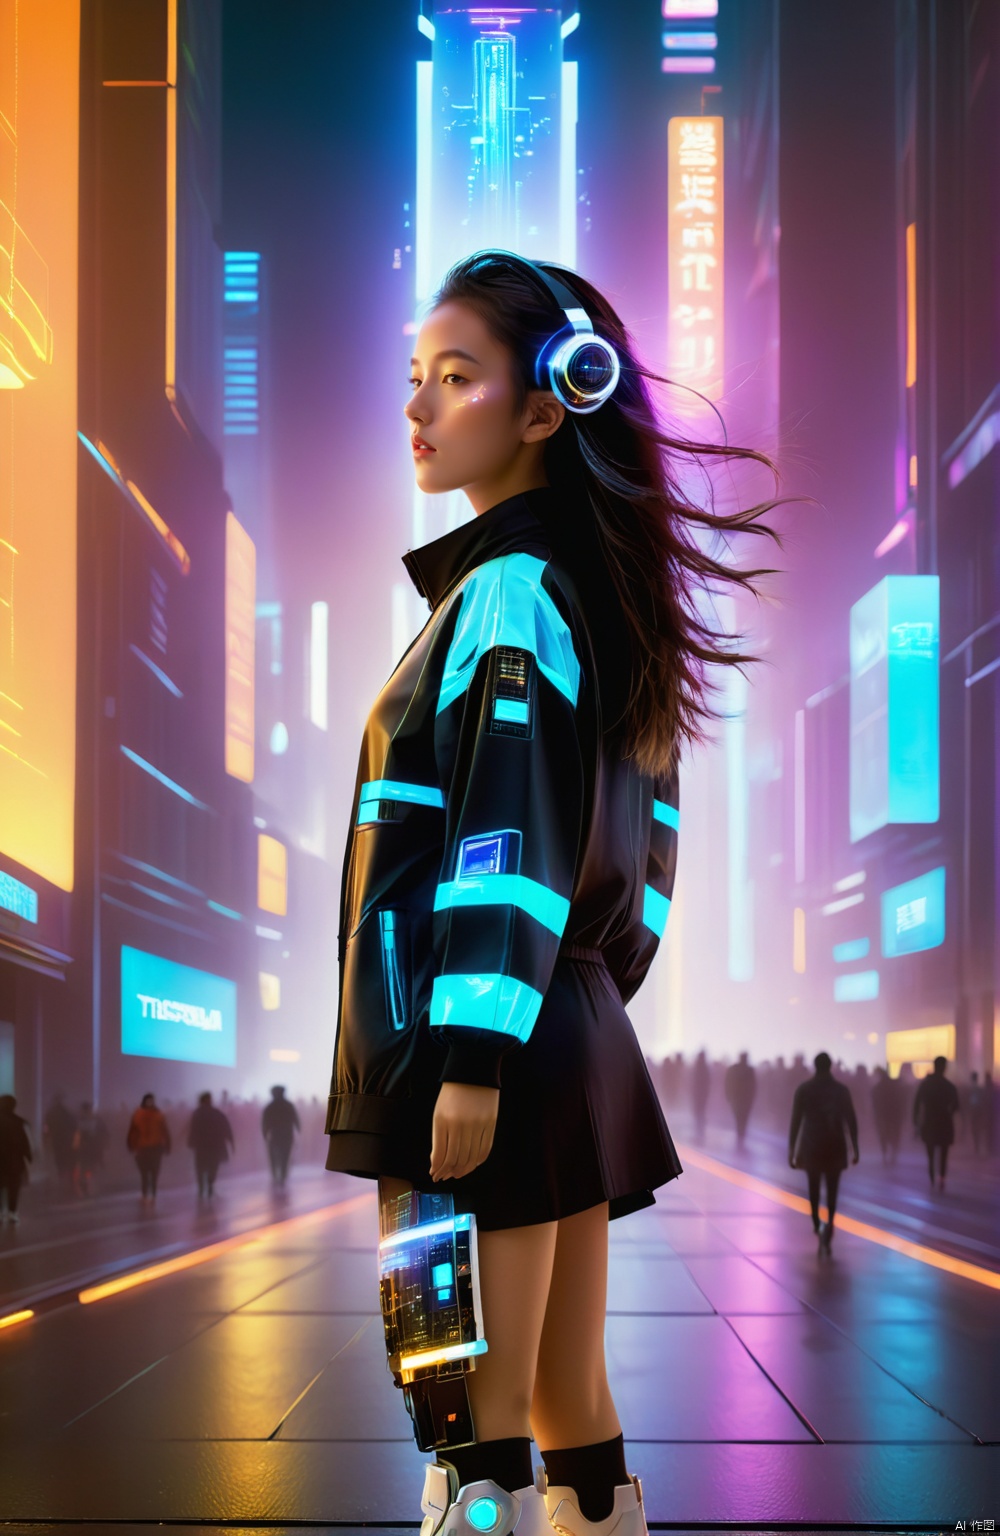 1girl,solo,full body,
In a horizontally oriented masterpiece rendered at an ultra-high 16K image quality that embodies the technology of the future, there stands a cyberpunk girl amidst a backdrop composed of tightly packed city blocks, towering skyscrapers, and neon-lit signs. This girl epitomizes the fusion of cutting-edge artistry and technology with meticulous attention paid to every detail in envisioning a unique interpretation of tomorrow's world.

Her attire is crafted from luminescent materials, featuring multiple lines of light tracing her form, creating a mesmerizing interplay of body-hugging beams (1.2). The entire ensemble sparkles as various points across her body emit light, weaving a dazzling visual spectacle.

An oversized glowing electronic screen adorns her body, dynamically streaming electronic messages and data flows (1.3), vividly encapsulating the torrential nature of digital information in a futuristic existence. A holographic projection system is integrated into her arm, extending outwards from a sleeve, casting images into the air—a testament to how deeply technology permeates daily life in this imagined future.

Text that glows luminously is inscribed upon her thigh, adding a layer of narrative intrigue to her overall aesthetic. She sports a pair of glowing electronic shoes that not only match but also harmoniously interact with her radiant outfit.

Colored smoke envelops her feet, imbuing the scene with an ethereal and enigmatic atmosphere. The girl strikes a powerful and evocative pose (1.2), serving as a symbolic bridge between reality and the realm of high-tech futurism.

In summary, this vision presents a cyberpunk girl who, through her illuminated garb, interactive body projections, and illuminated accessories, transcends the boundaries of the present while inviting viewers to embark on a journey into a new world where fashion design, advanced technological functionality, and futuristic ideology blend seamlessly.